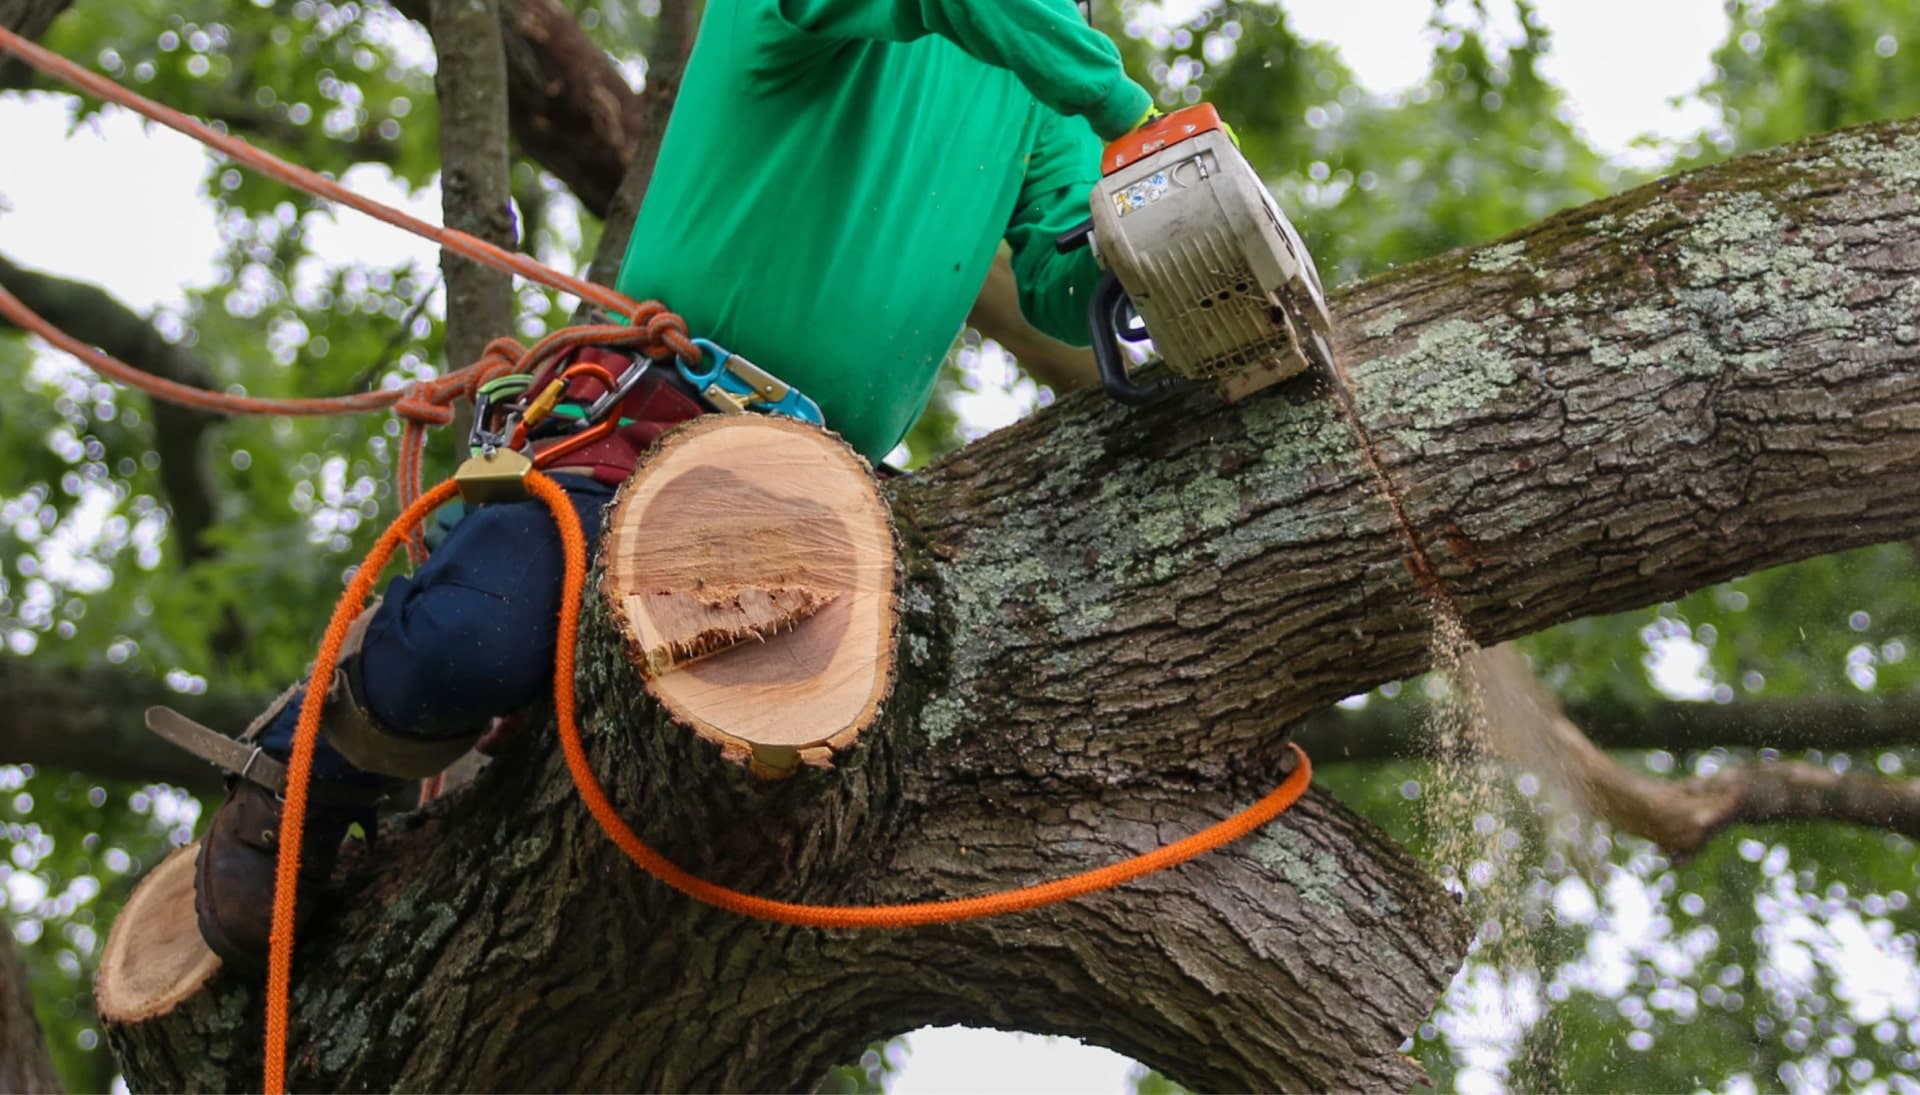 Shed your worries away with best tree removal in Milford